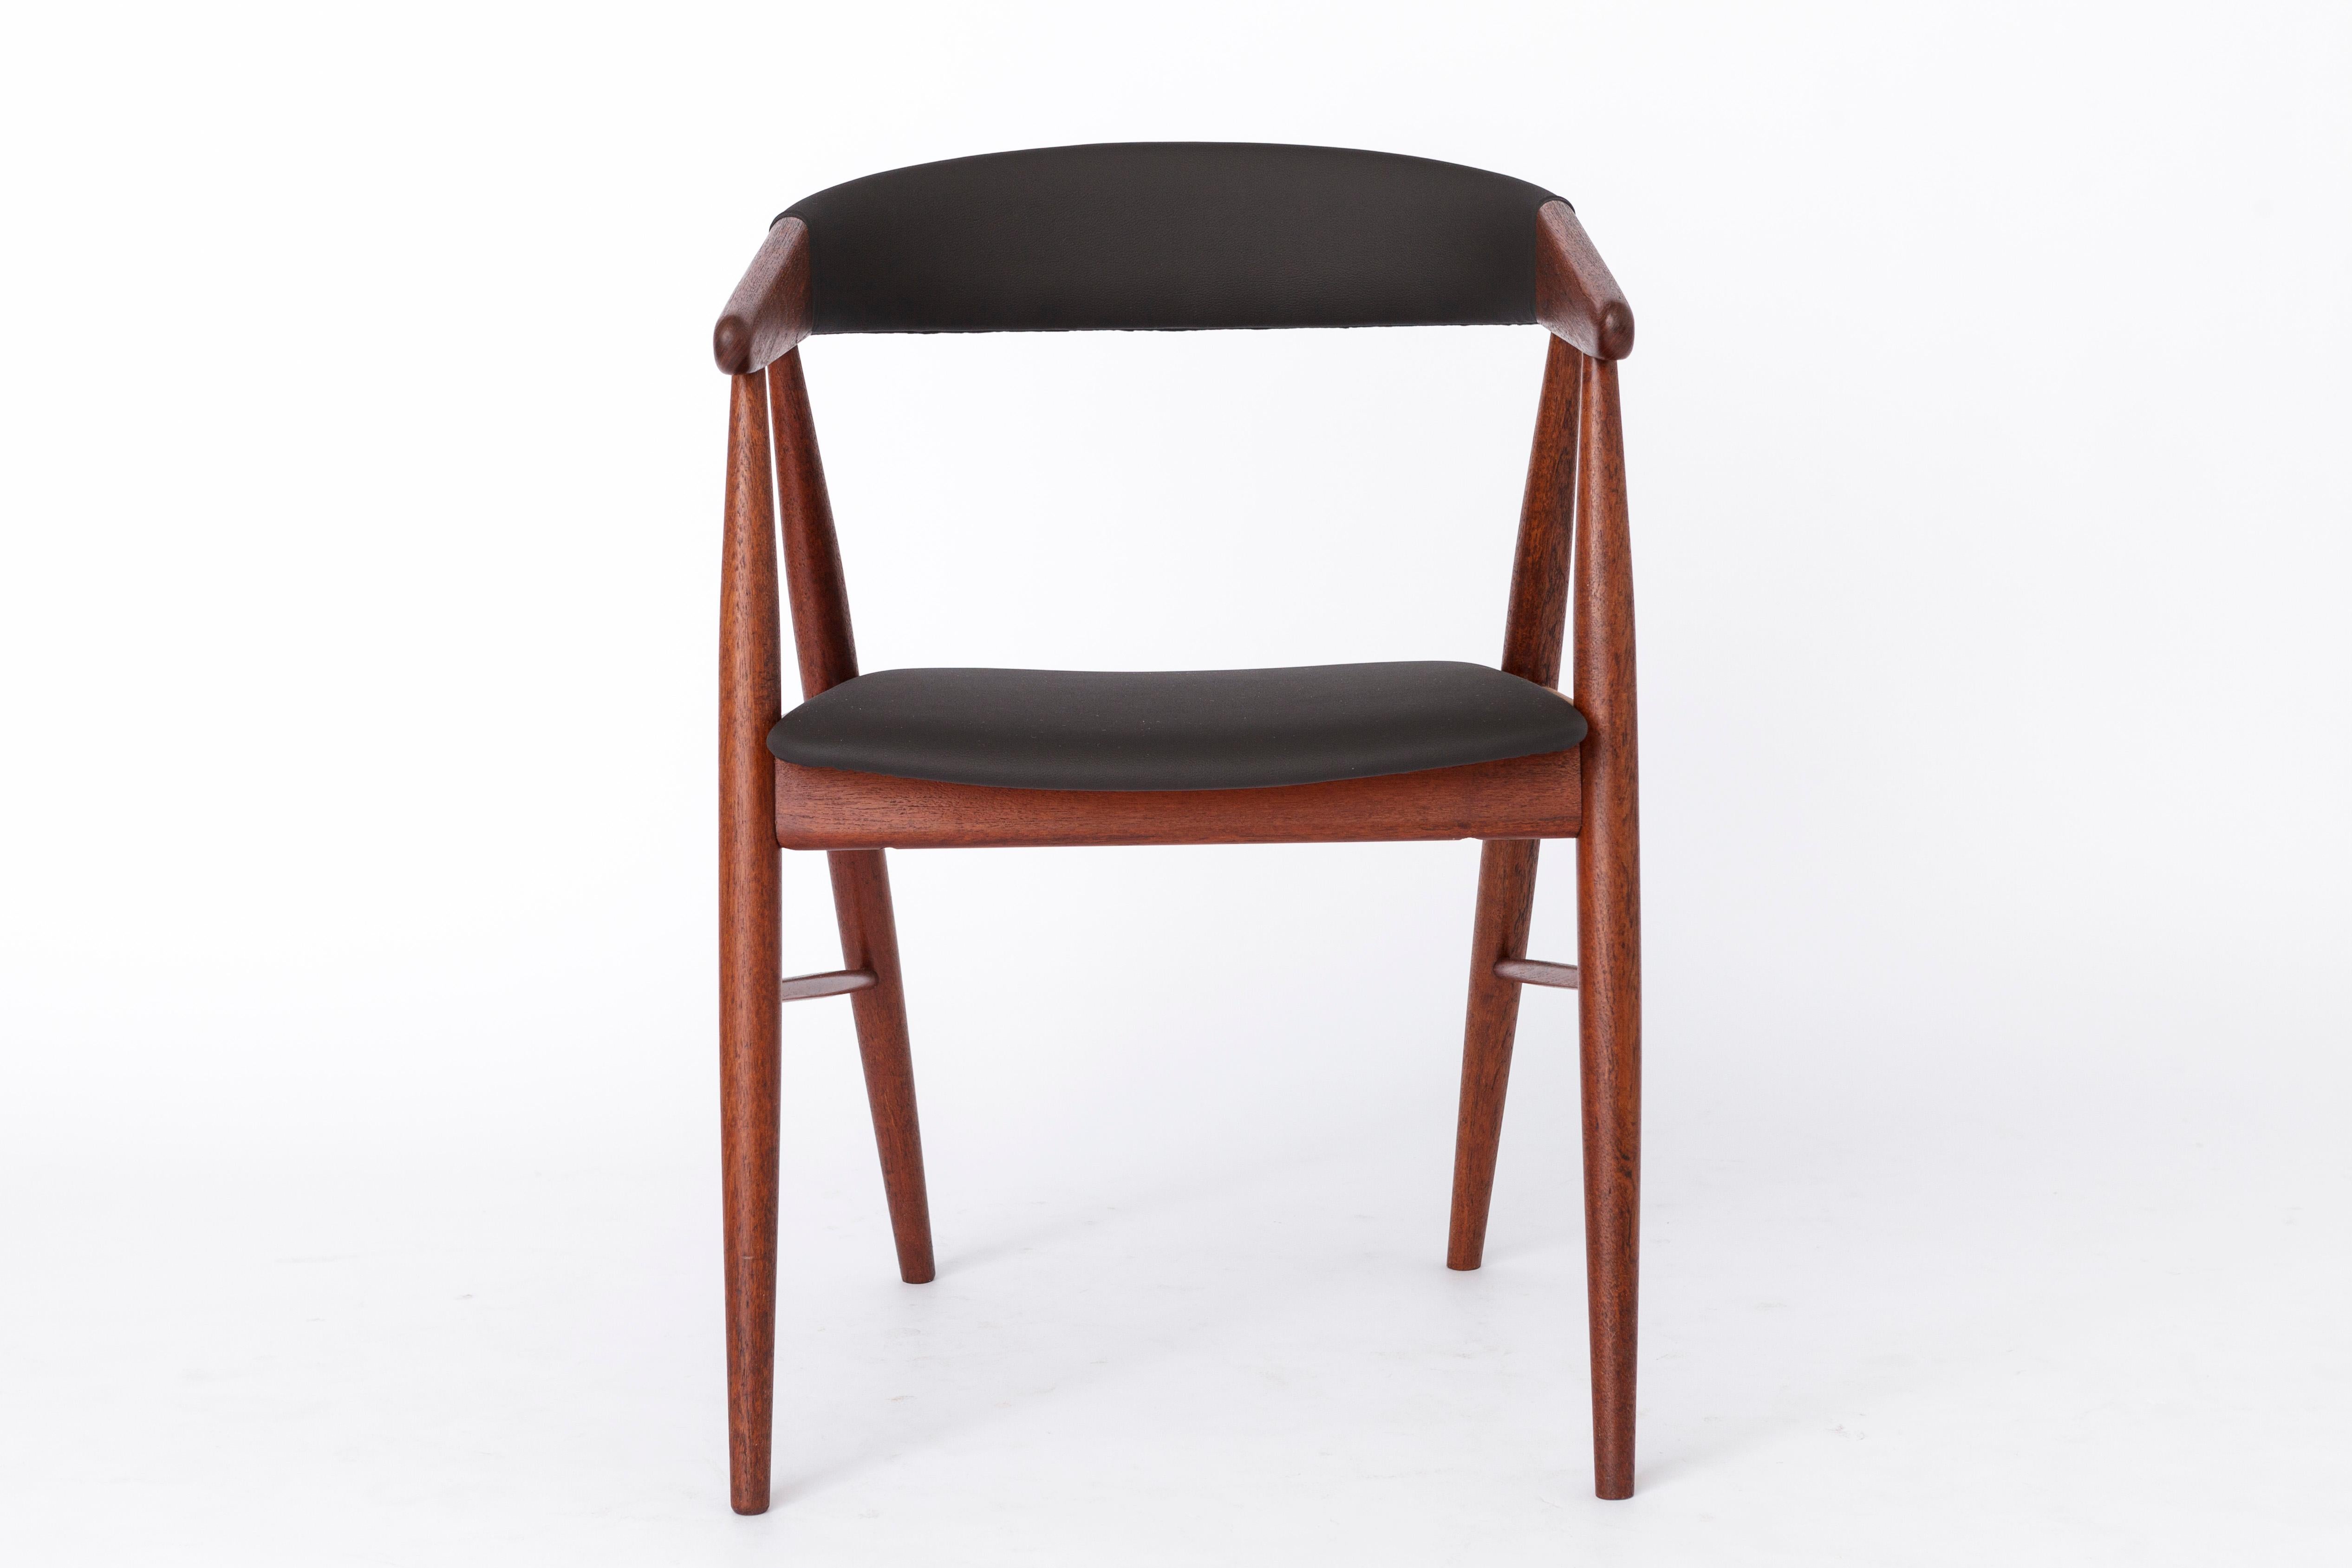 1 of 2 Danish dining chairs designed by Danish designers Ejnar Larsen & Aksel Bender in the 1960s. 
Displayed price is for 1 chair. Totally 2 chairs available. 

Good vintage condition of both chairs. Sturdy teak chair frames. Refurbished and oiled.